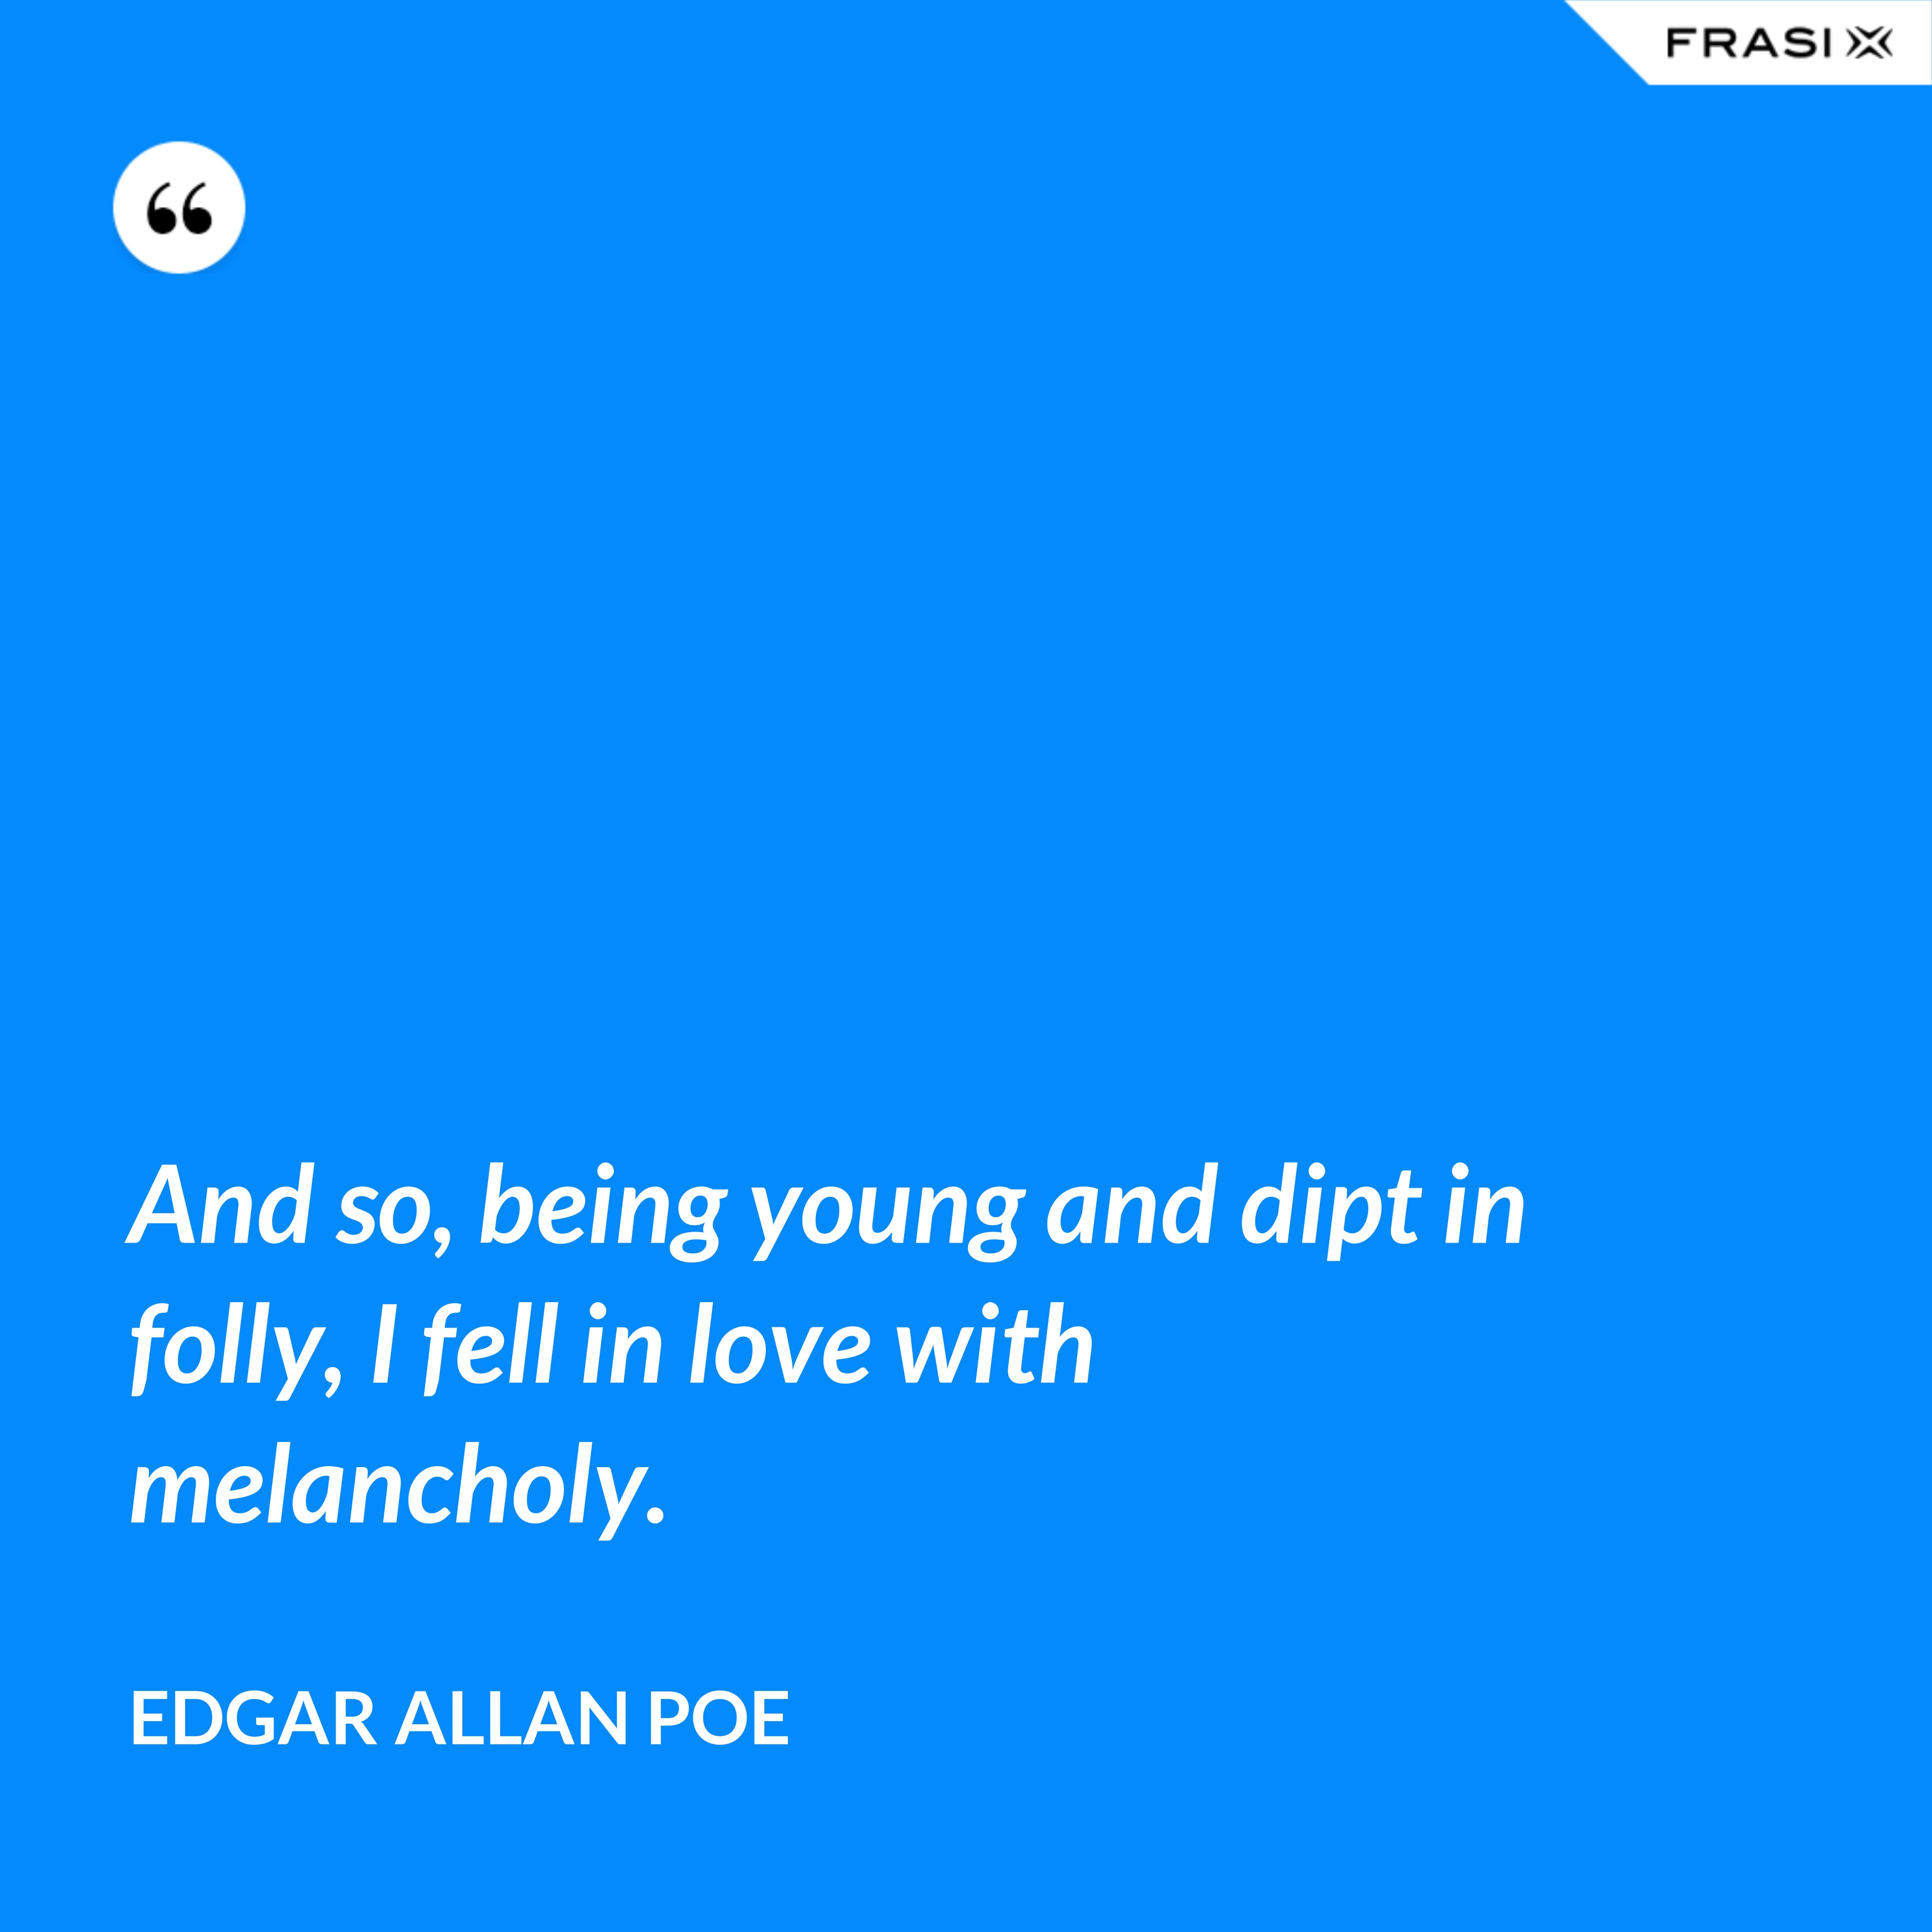 And so, being young and dipt in folly, I fell in love with melancholy. - Edgar Allan Poe